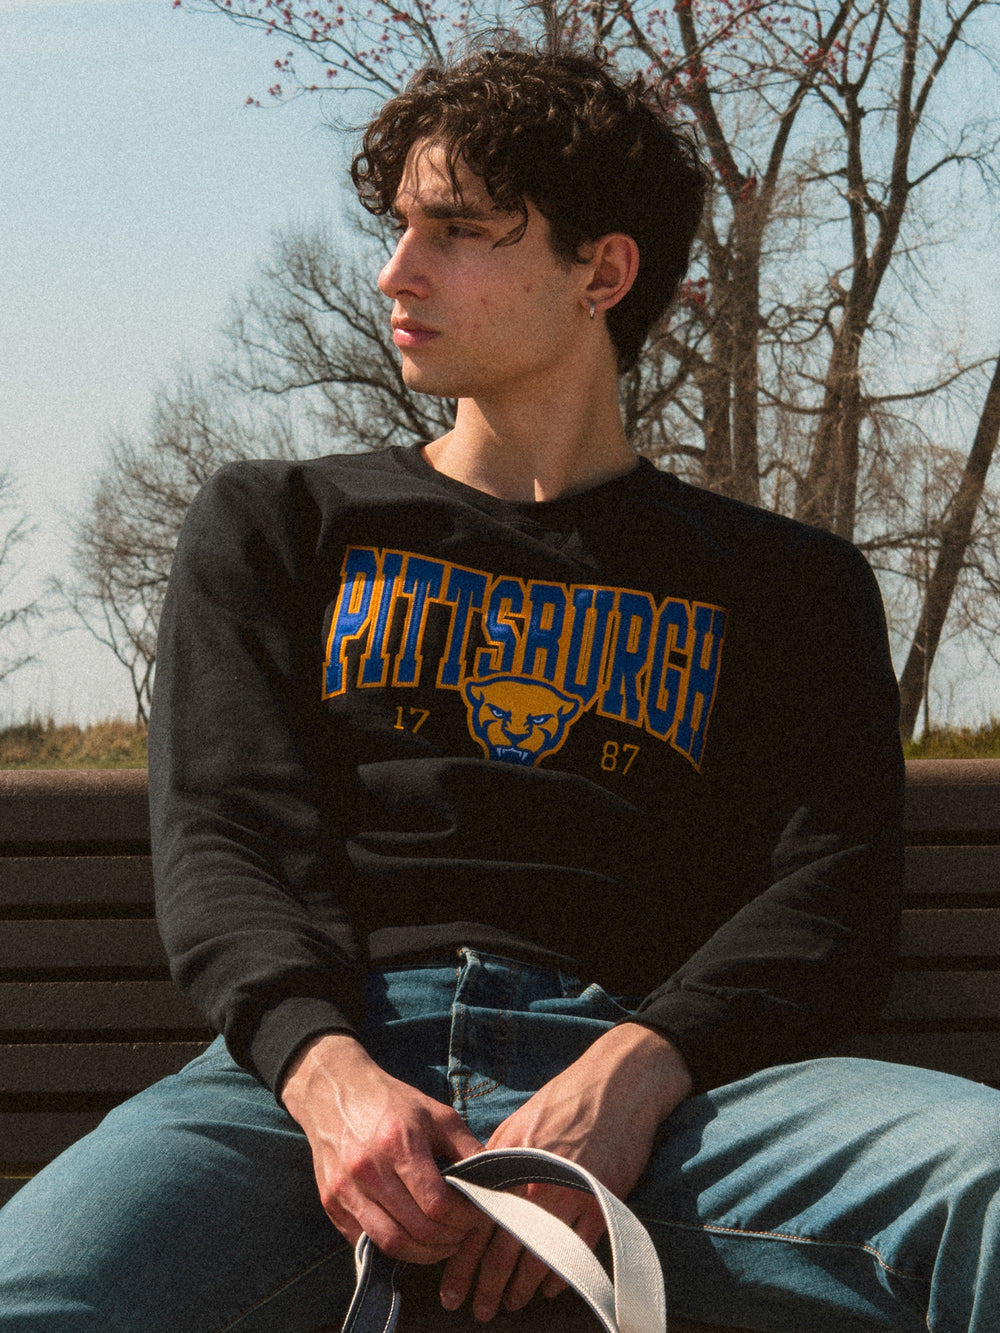 RUSSELL PITTSBURGH CREWNECK